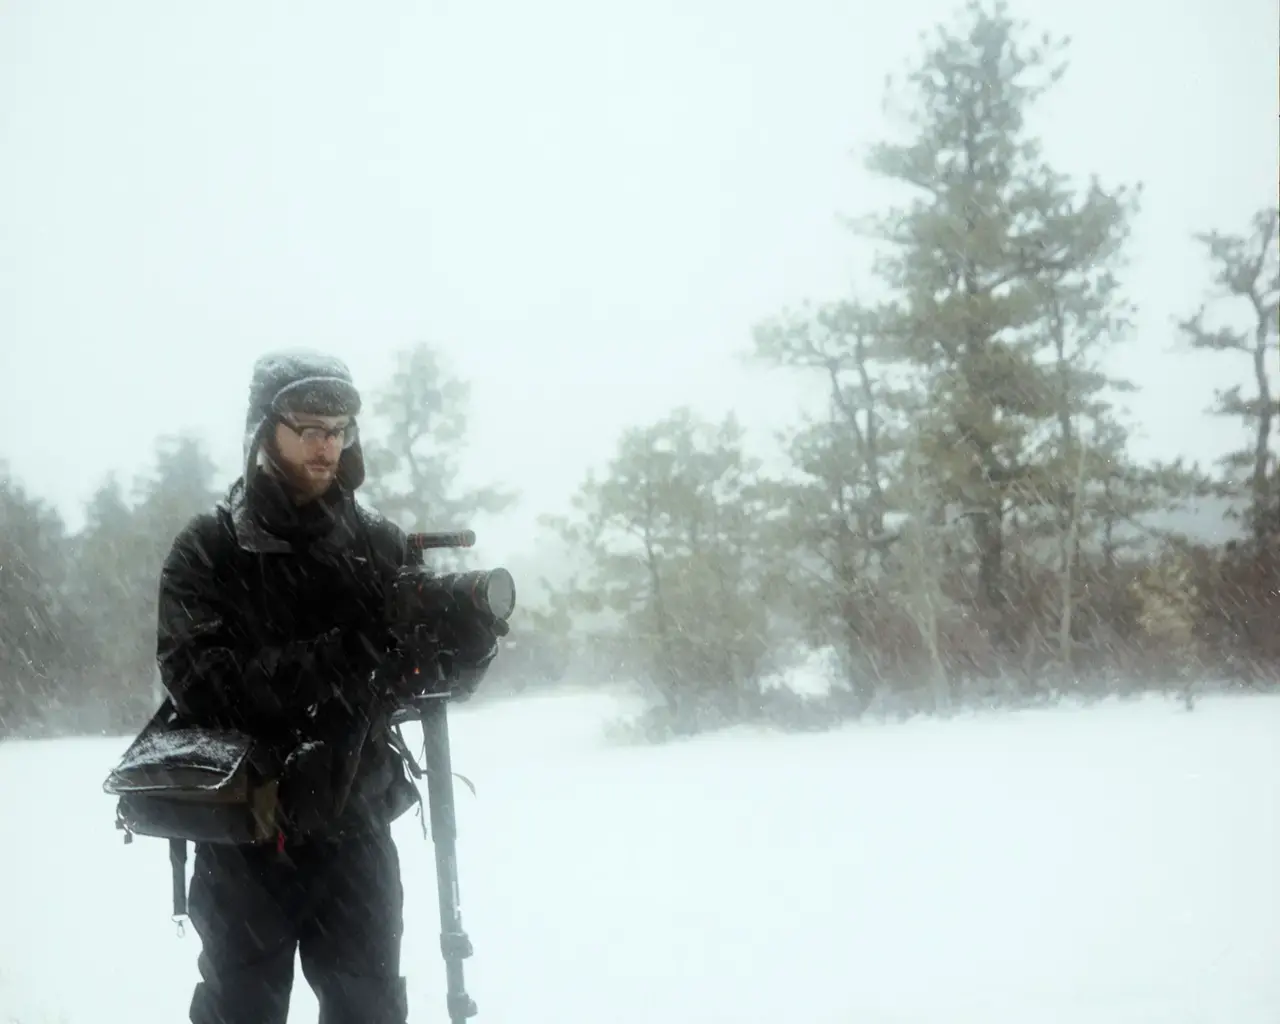 David Scott Kessler filming The Pine Barrens, 2015, on location in the Great Swamp, Wharton State Forest. Photo by John Pettit.